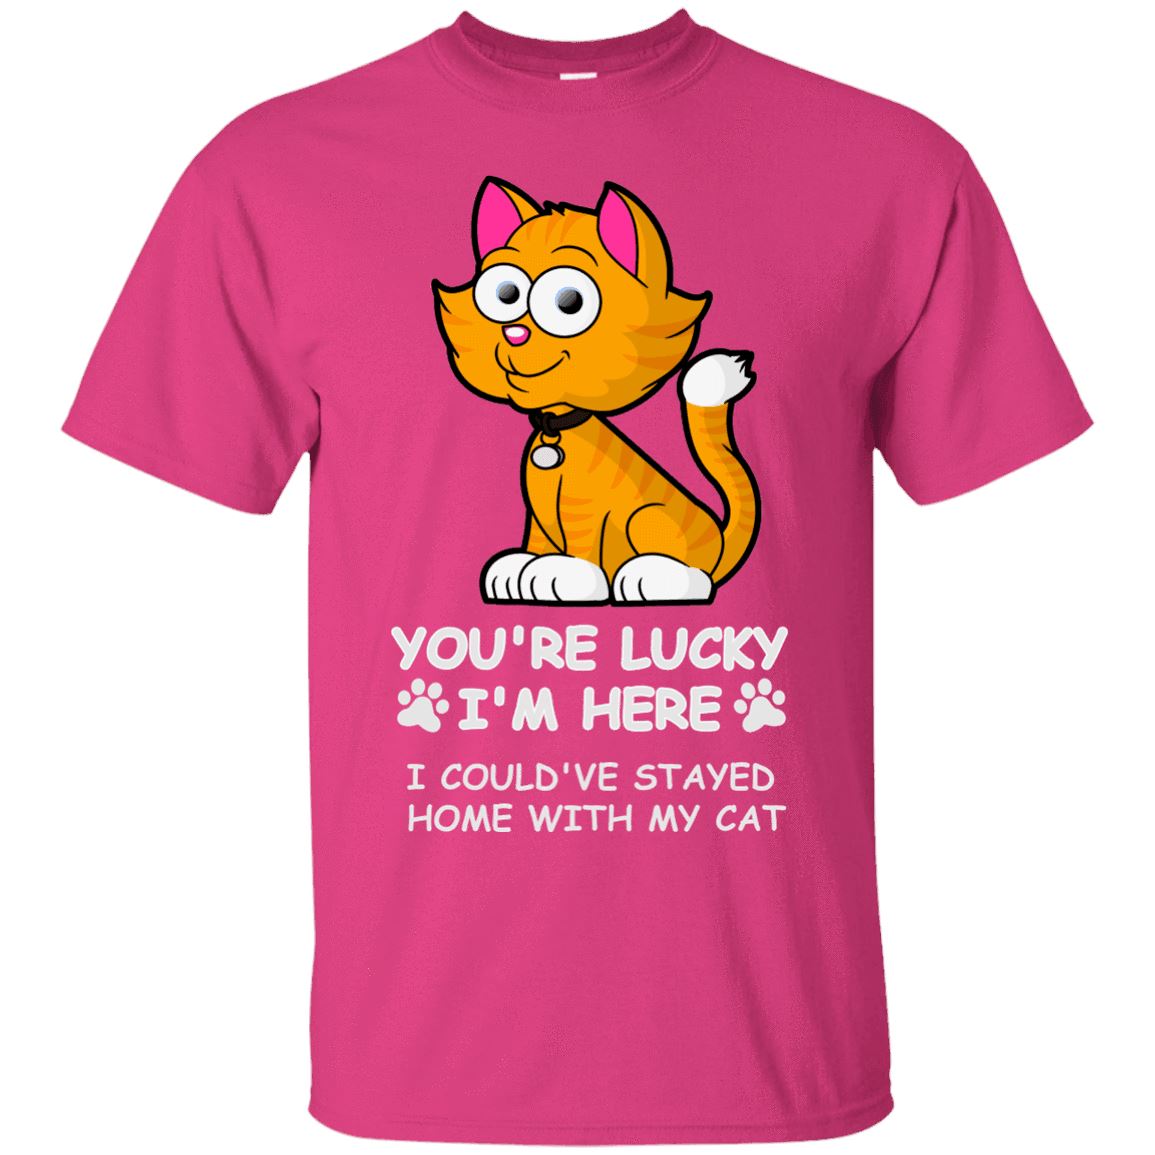 Cat Tee - You're Lucky I'm Here, I Could Have Stay Home With My Cat - CatsForLife